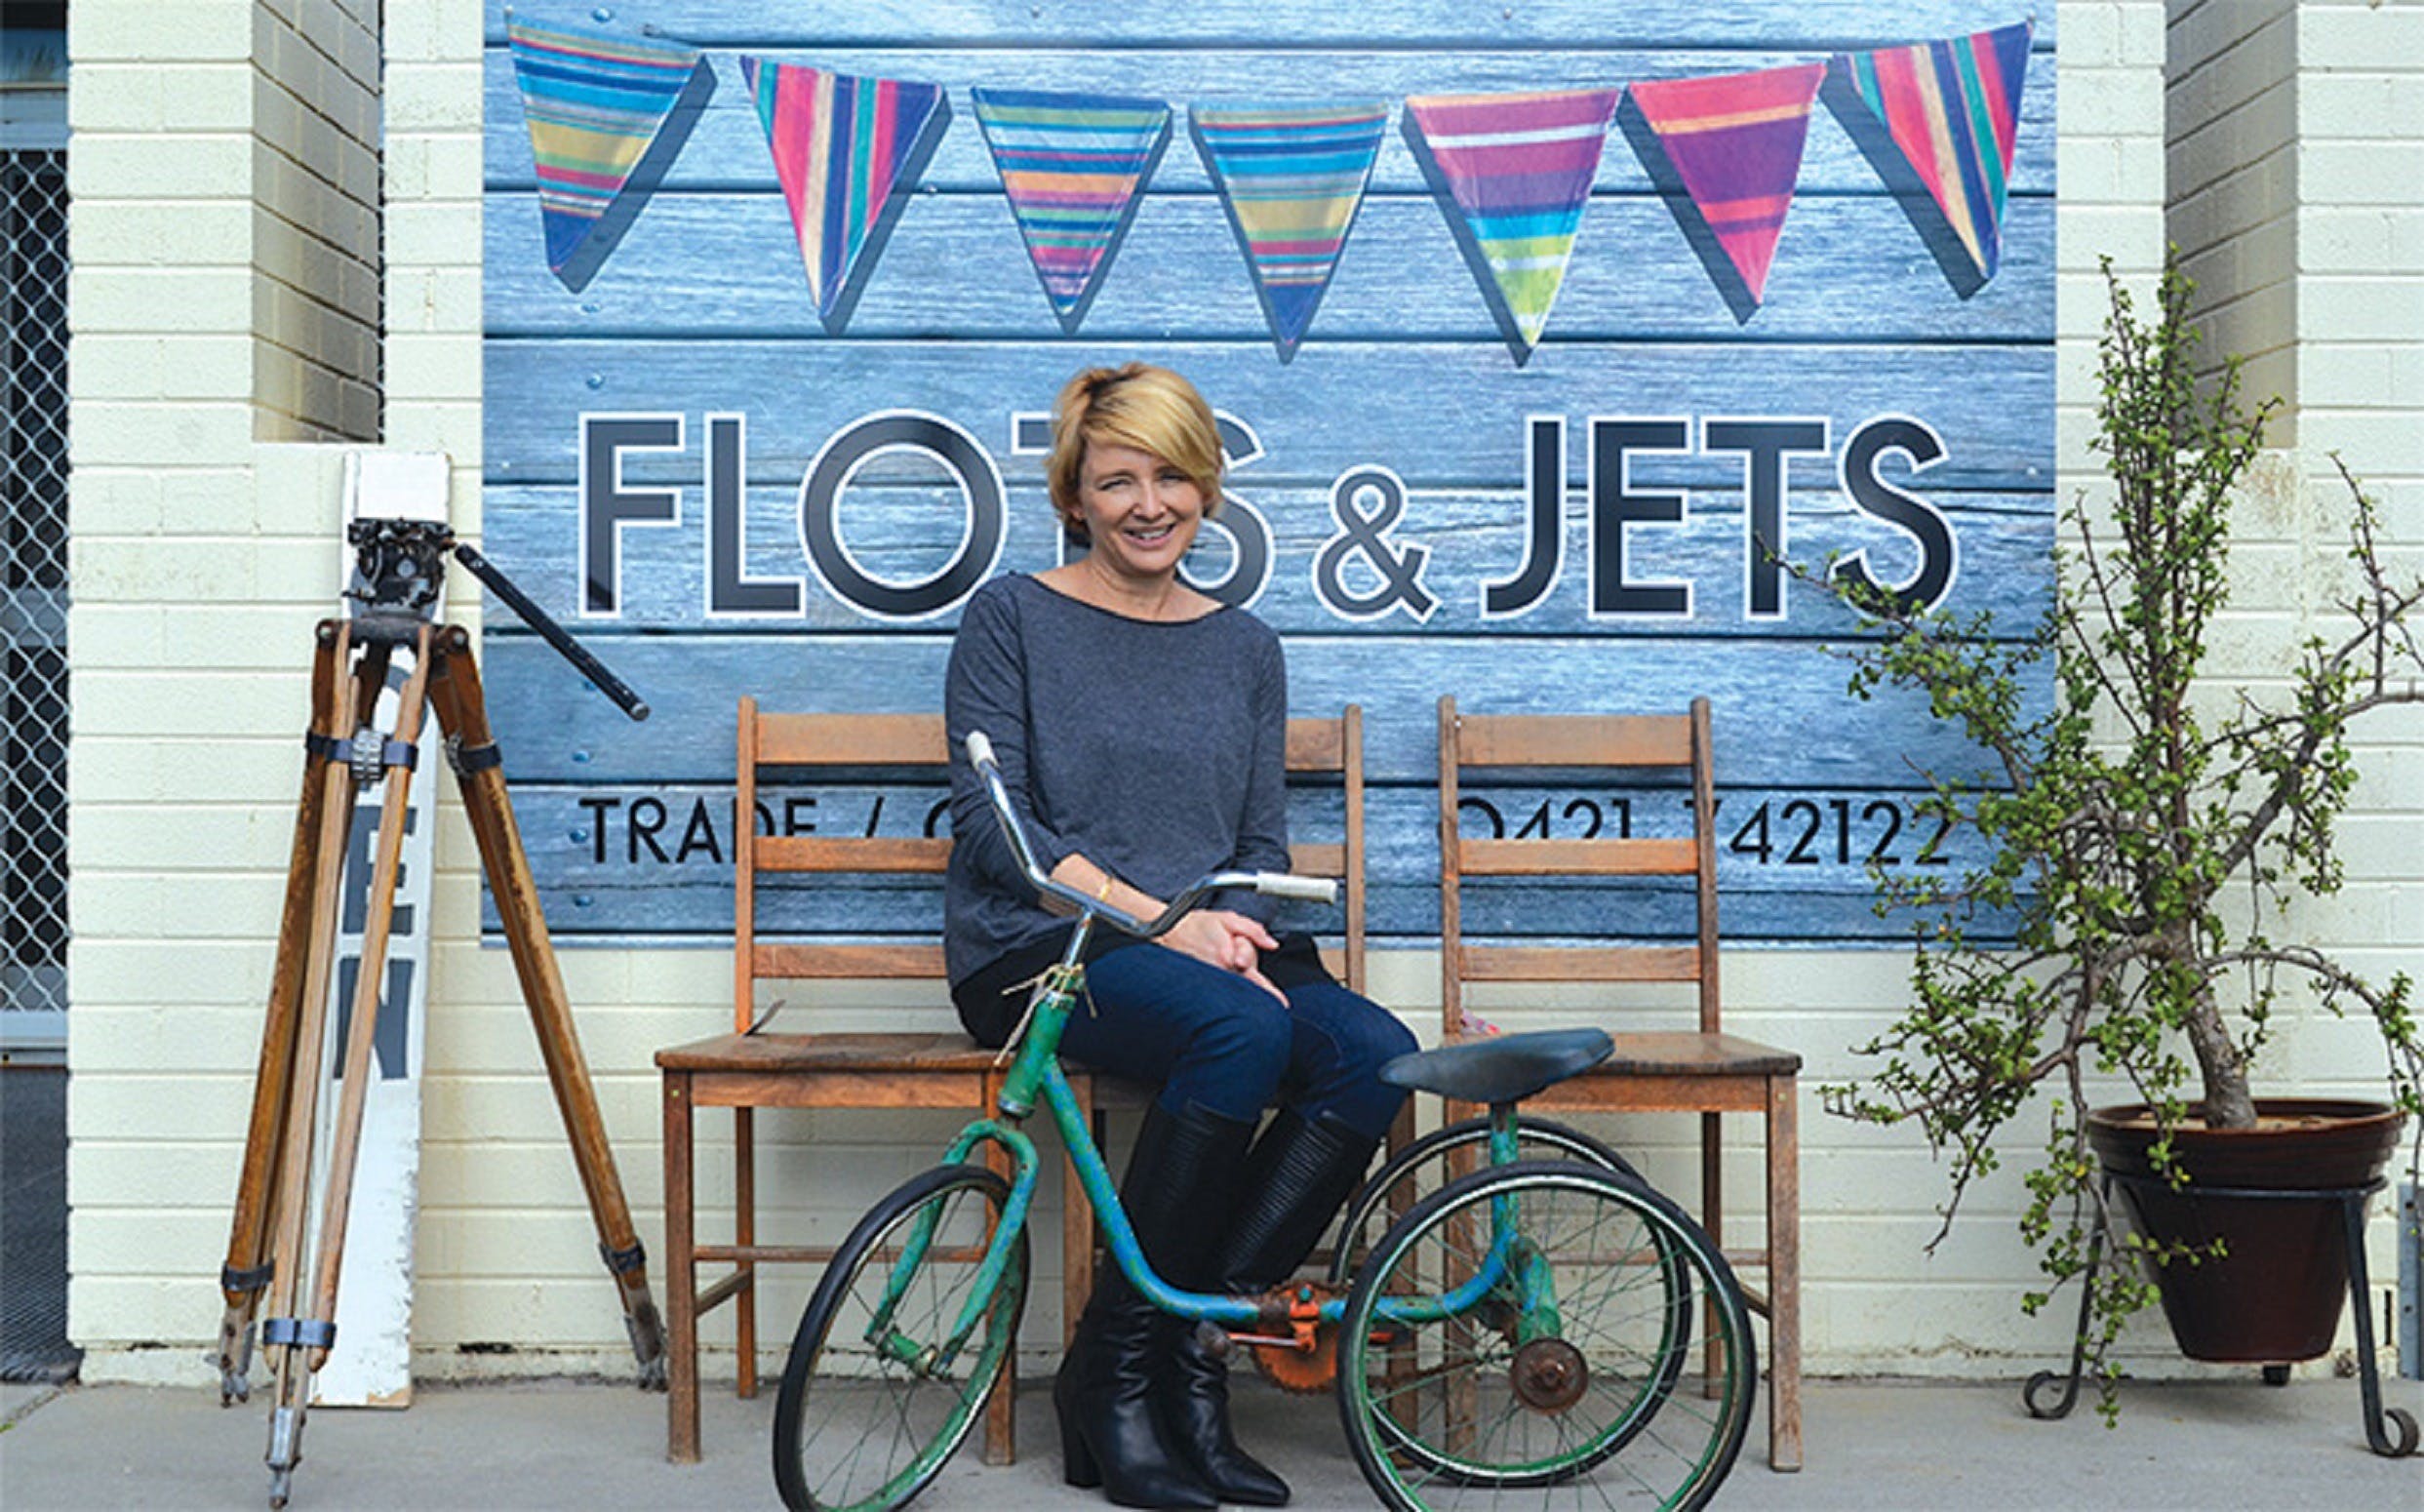 Flots and Jets - Tourism Adelaide